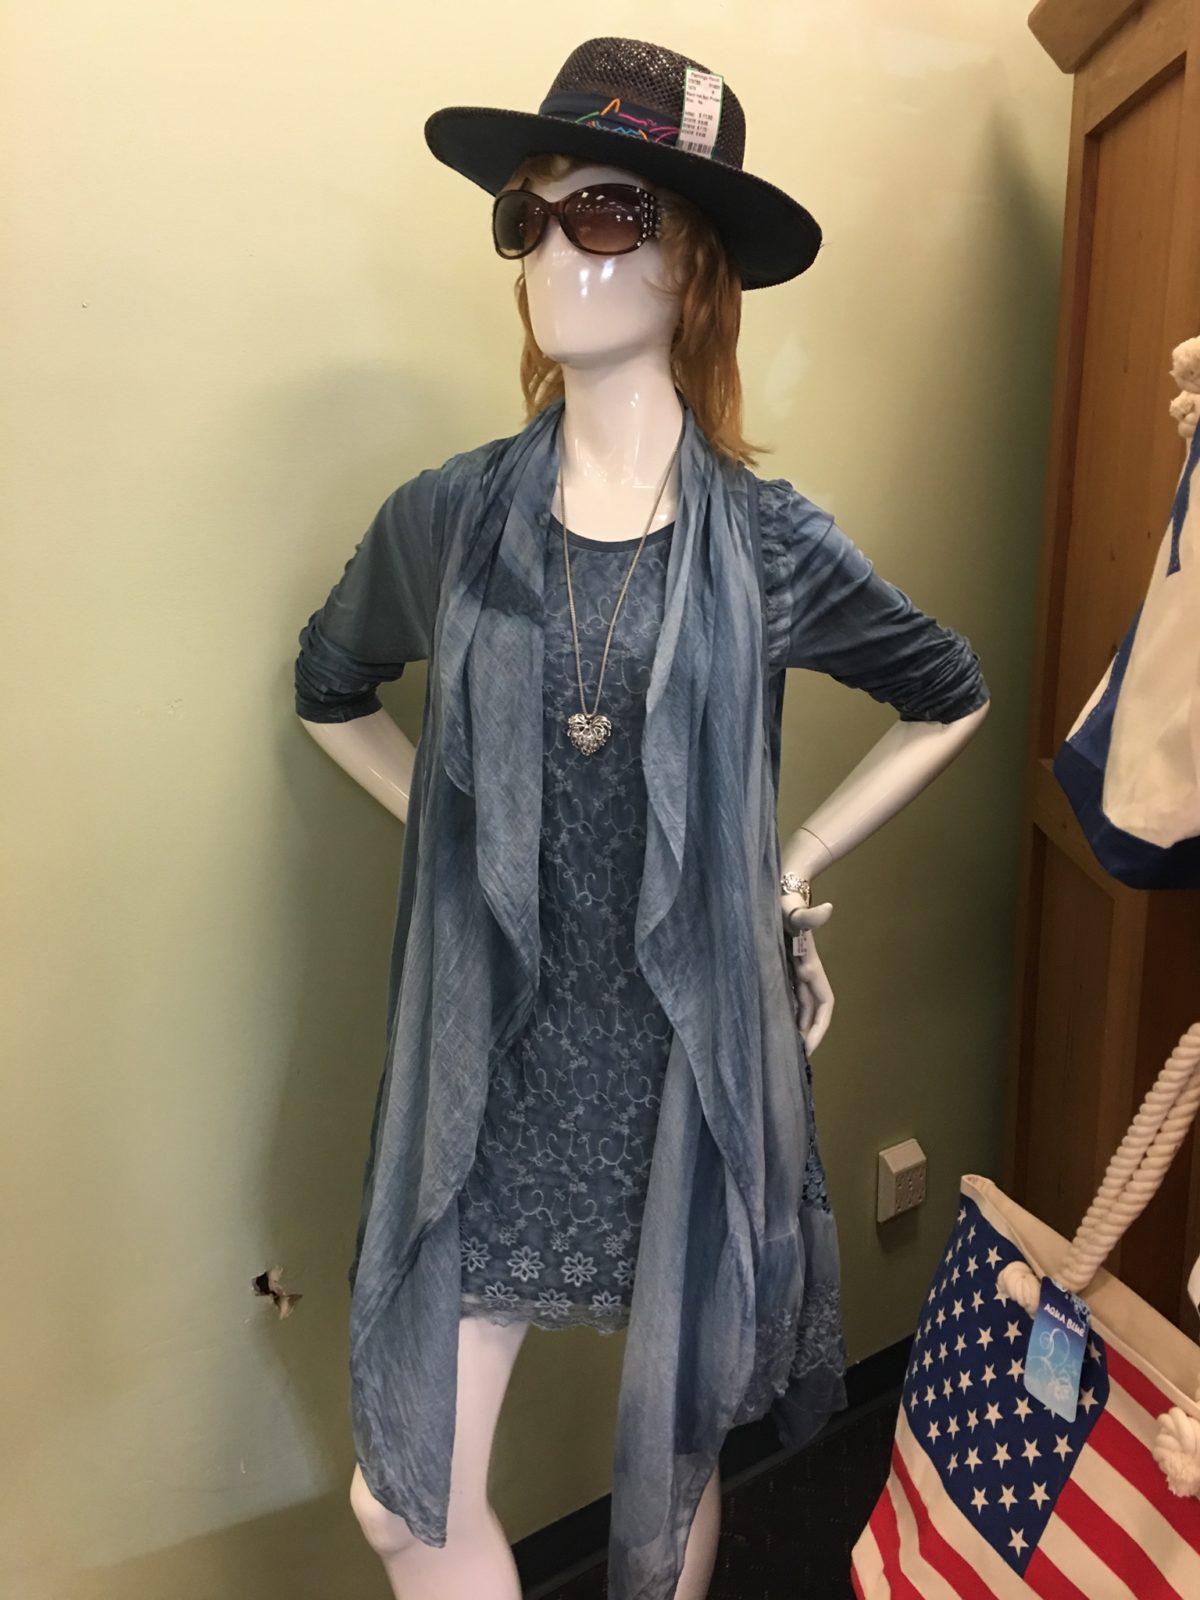 Jessica Taylor Designs • Now carrying 3 styles and 5 colors of her latest tops.  Two and three piece sets.  Lacey tops or beach covers.